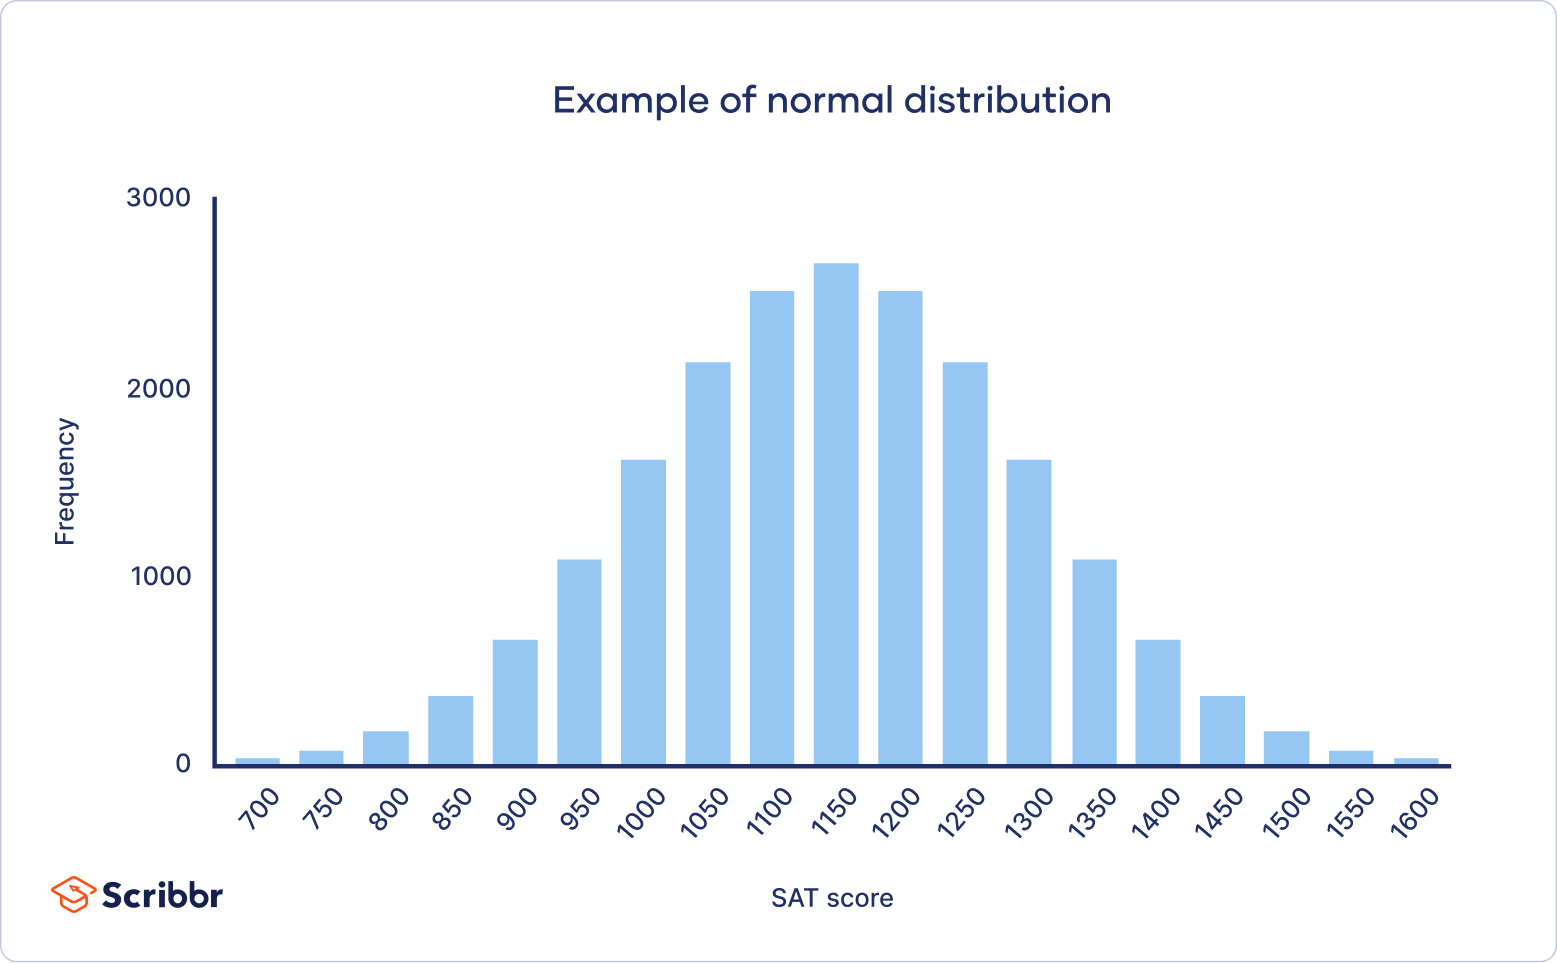 Bar chart showing a normal distribution of SAT scores